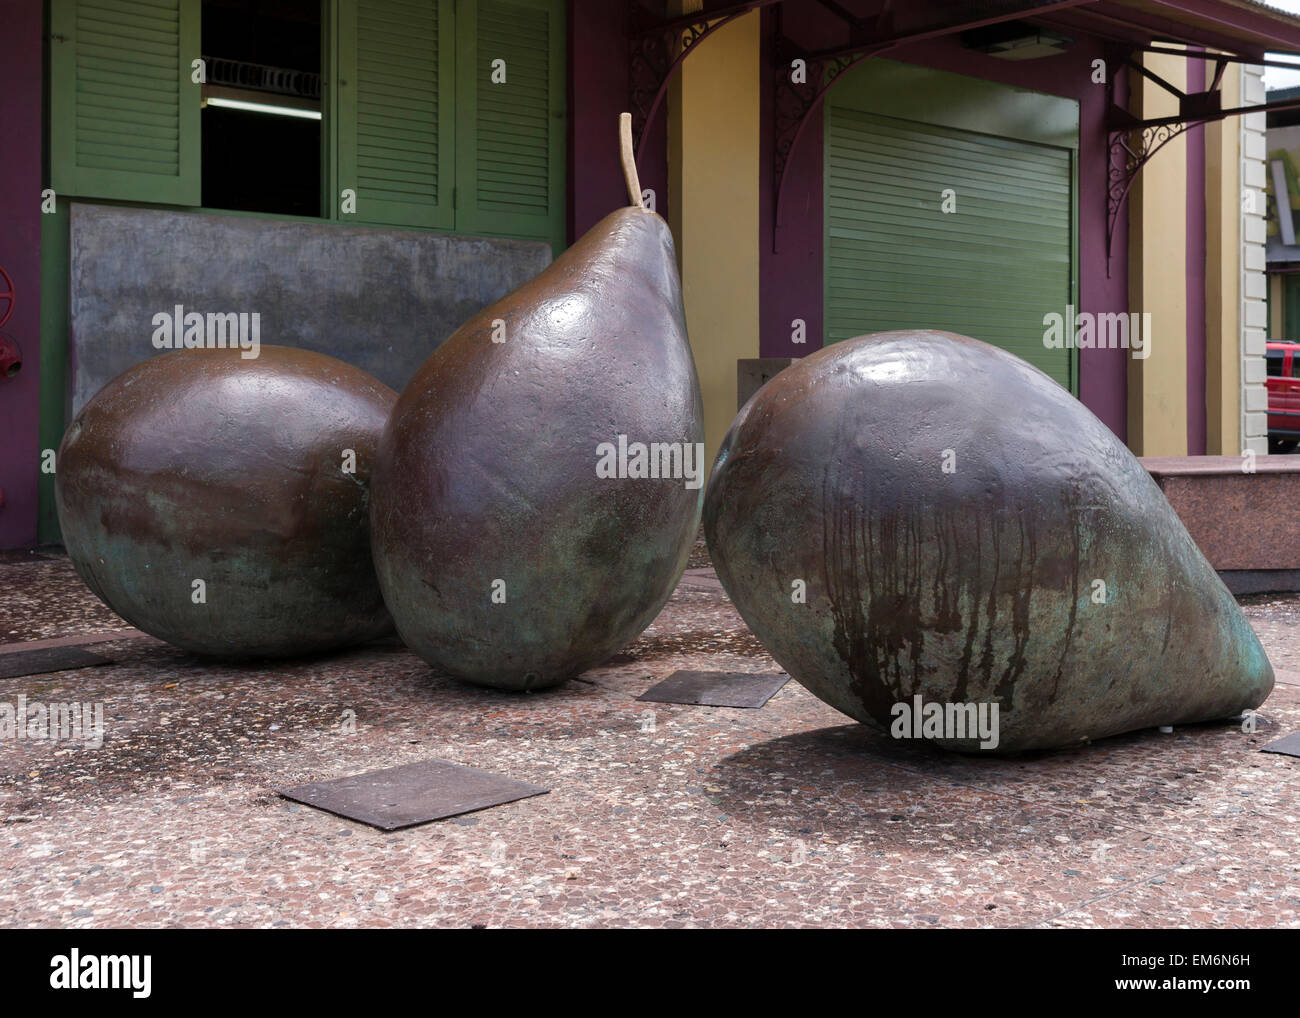 Giant pears statue. Stock Photo